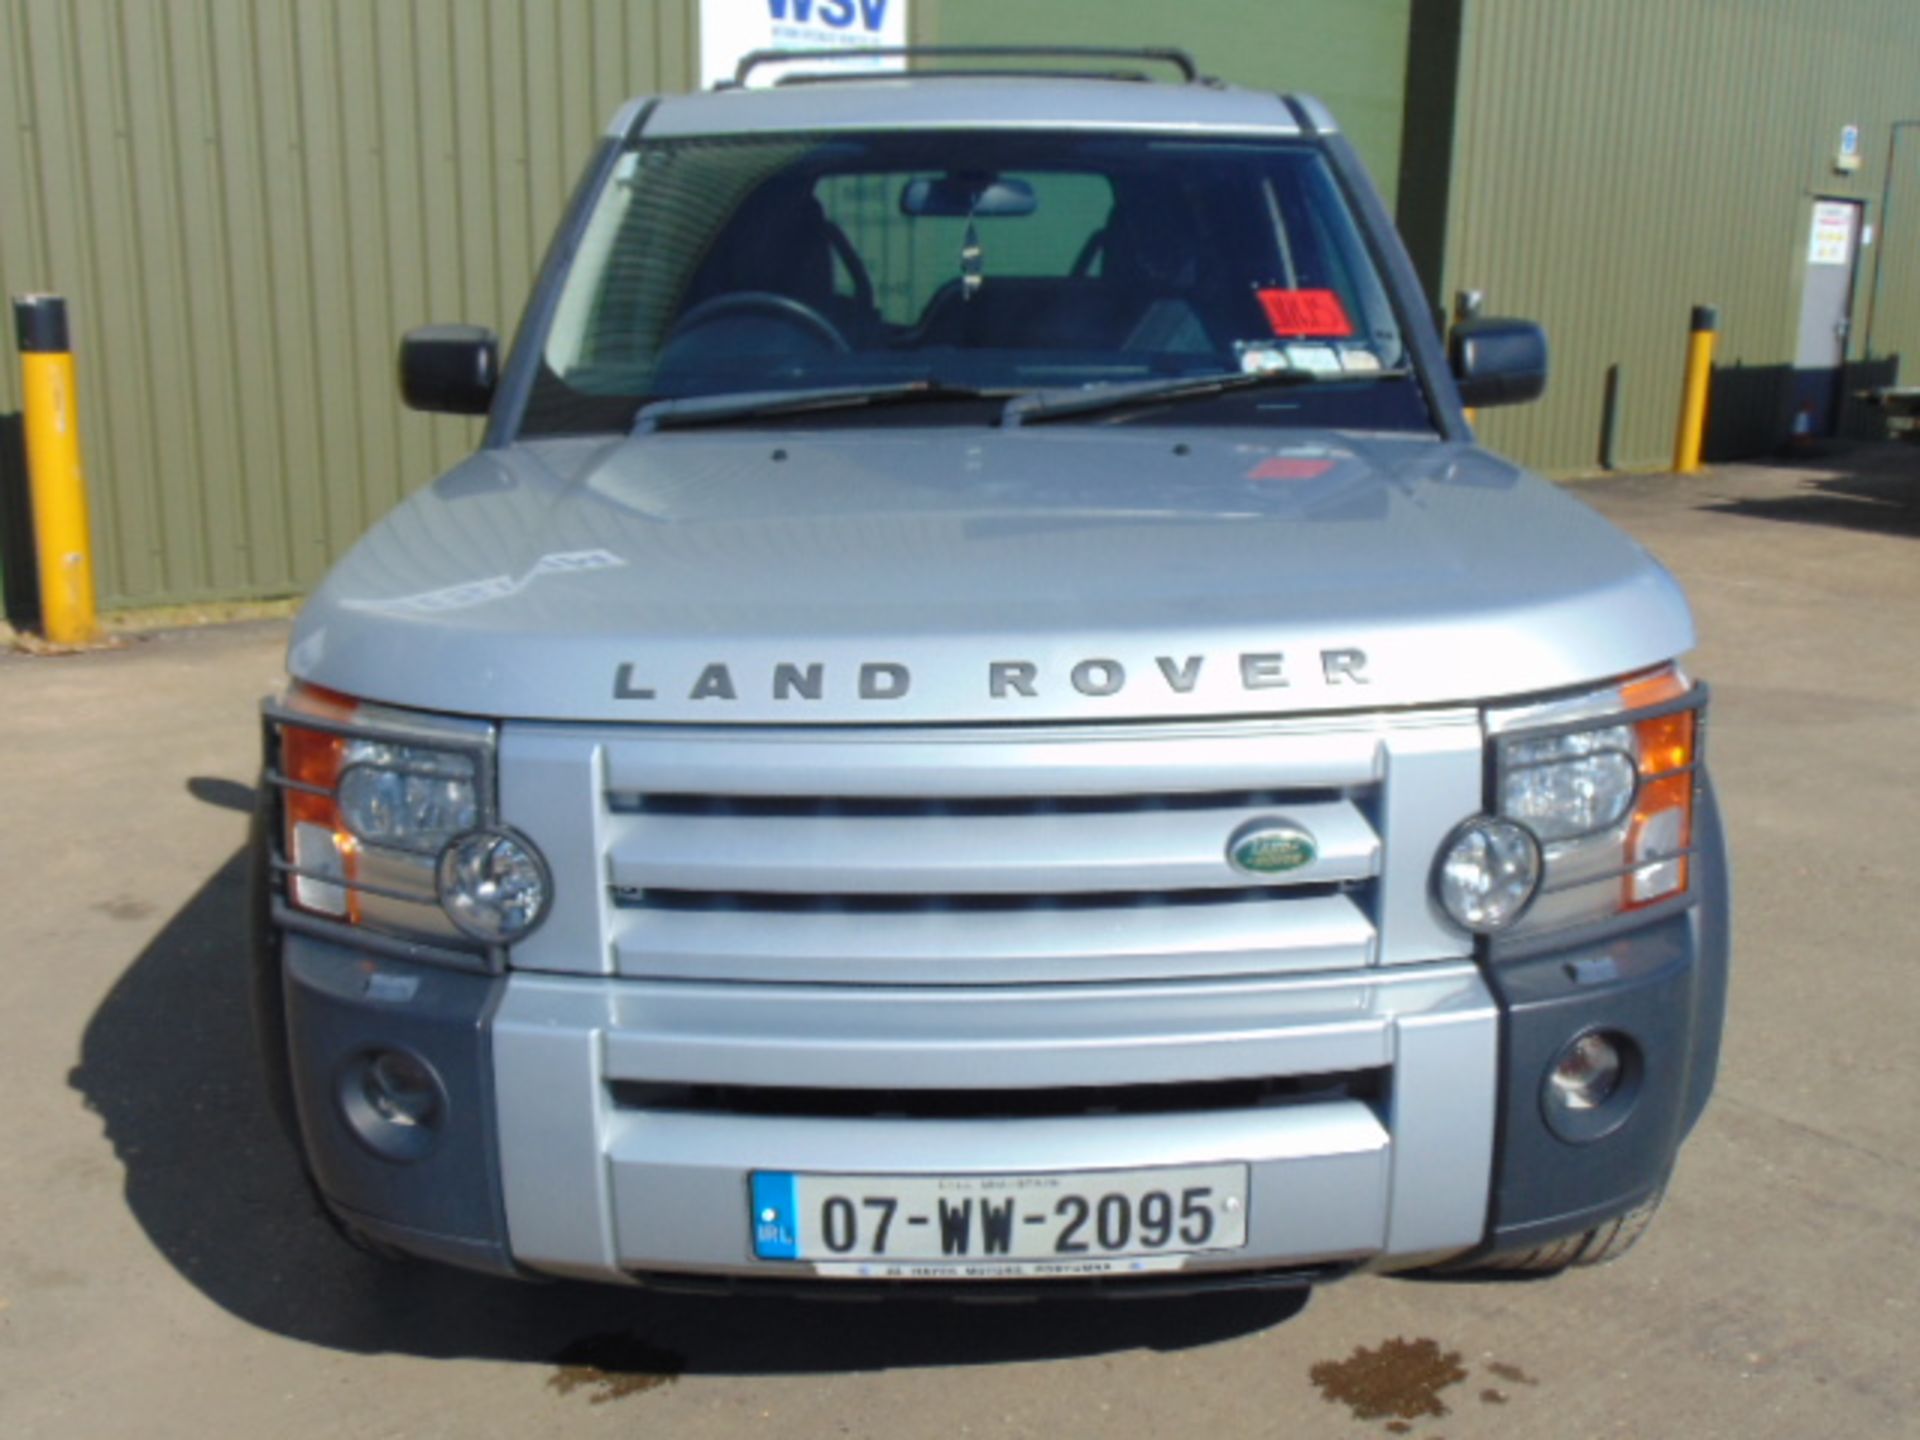 2007 Land Rover Discovery 3 TDV6 S 5d Manual Commercial - Image 2 of 24